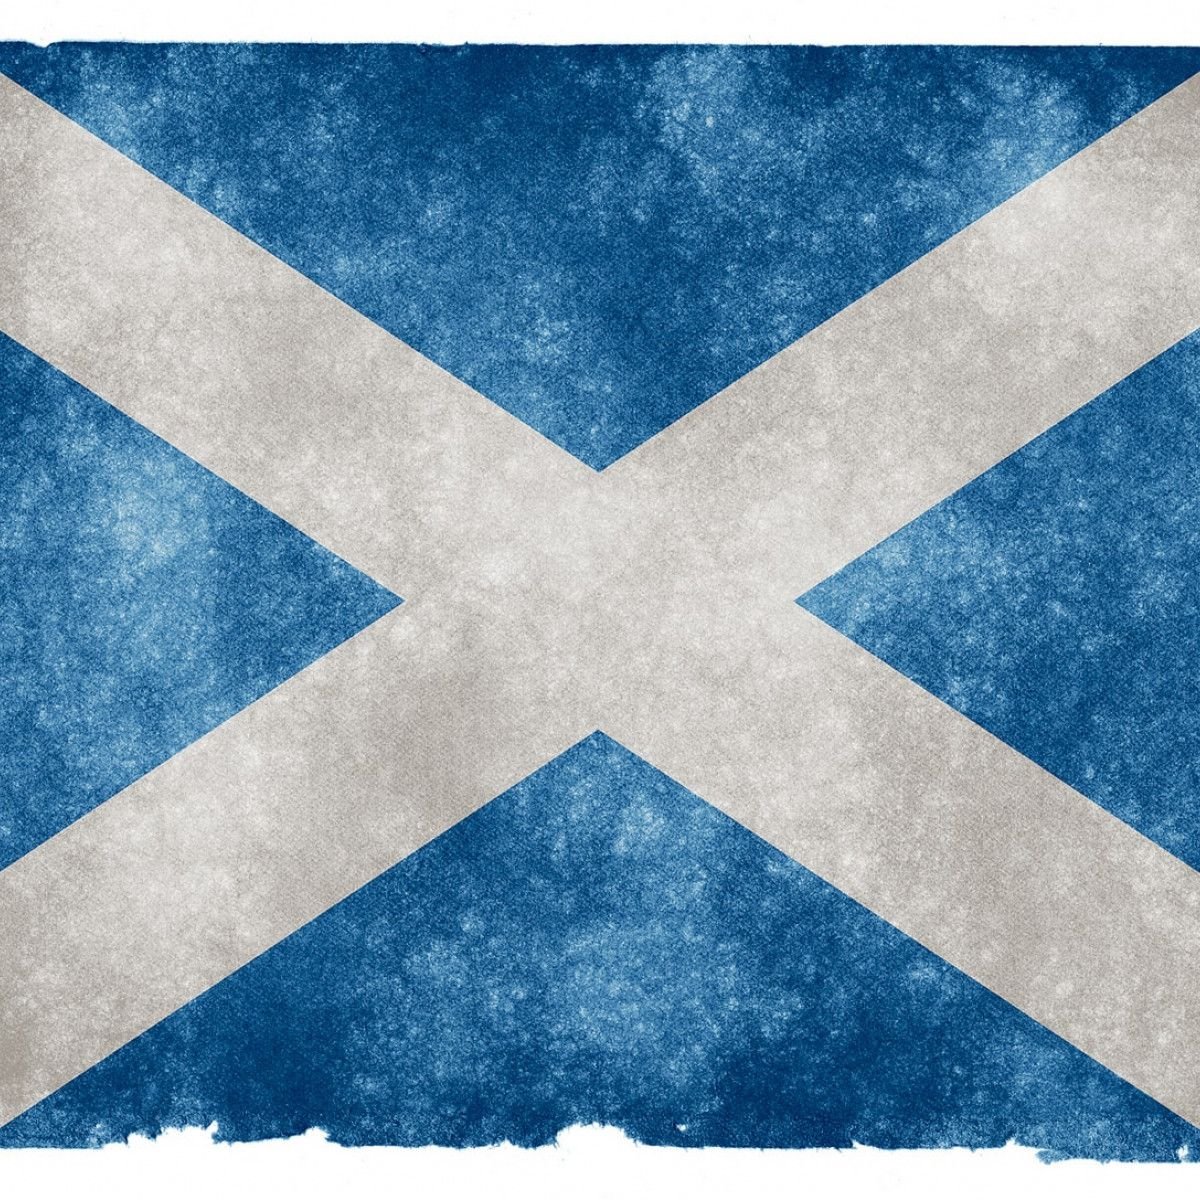 Flag of Scotland, Colors, Meaning & History